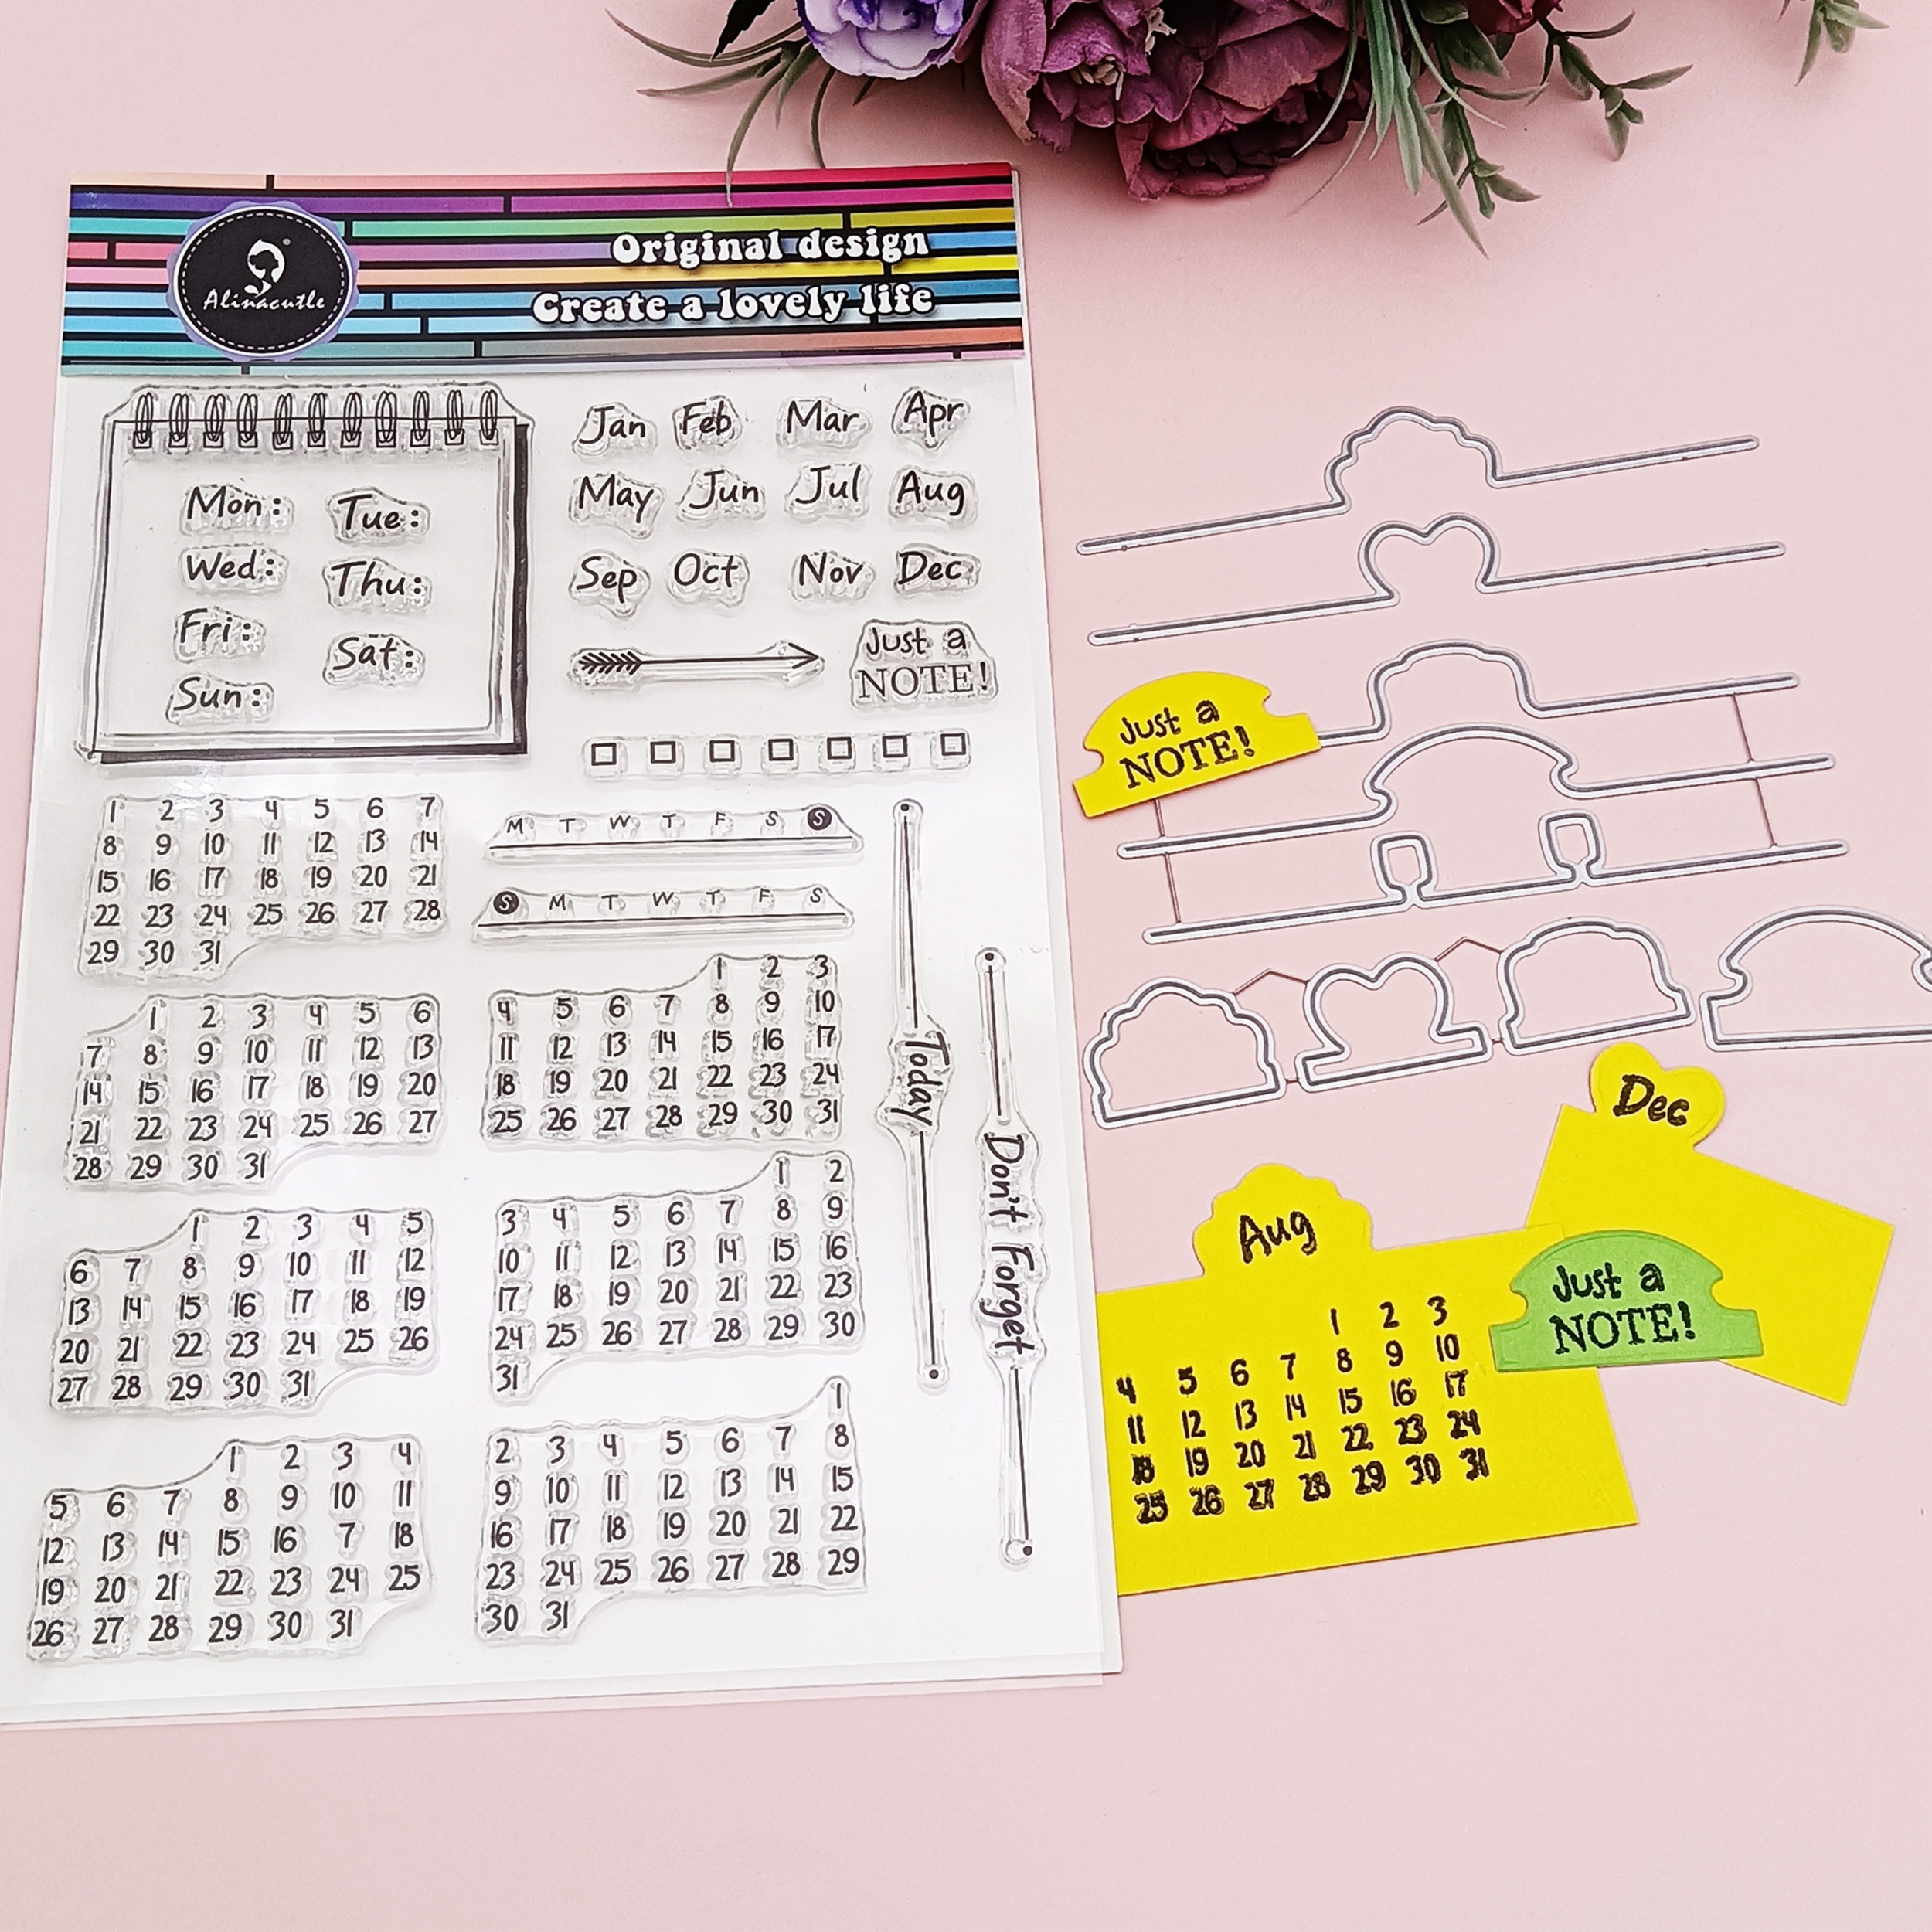 Alinacutle 1pc Planner Calendar Stamps 9pcs Journal Border Metal Cutting  Die Cuts Craft Clear Stamp For Handmade Cards Planner Book Scrapbooking And  A